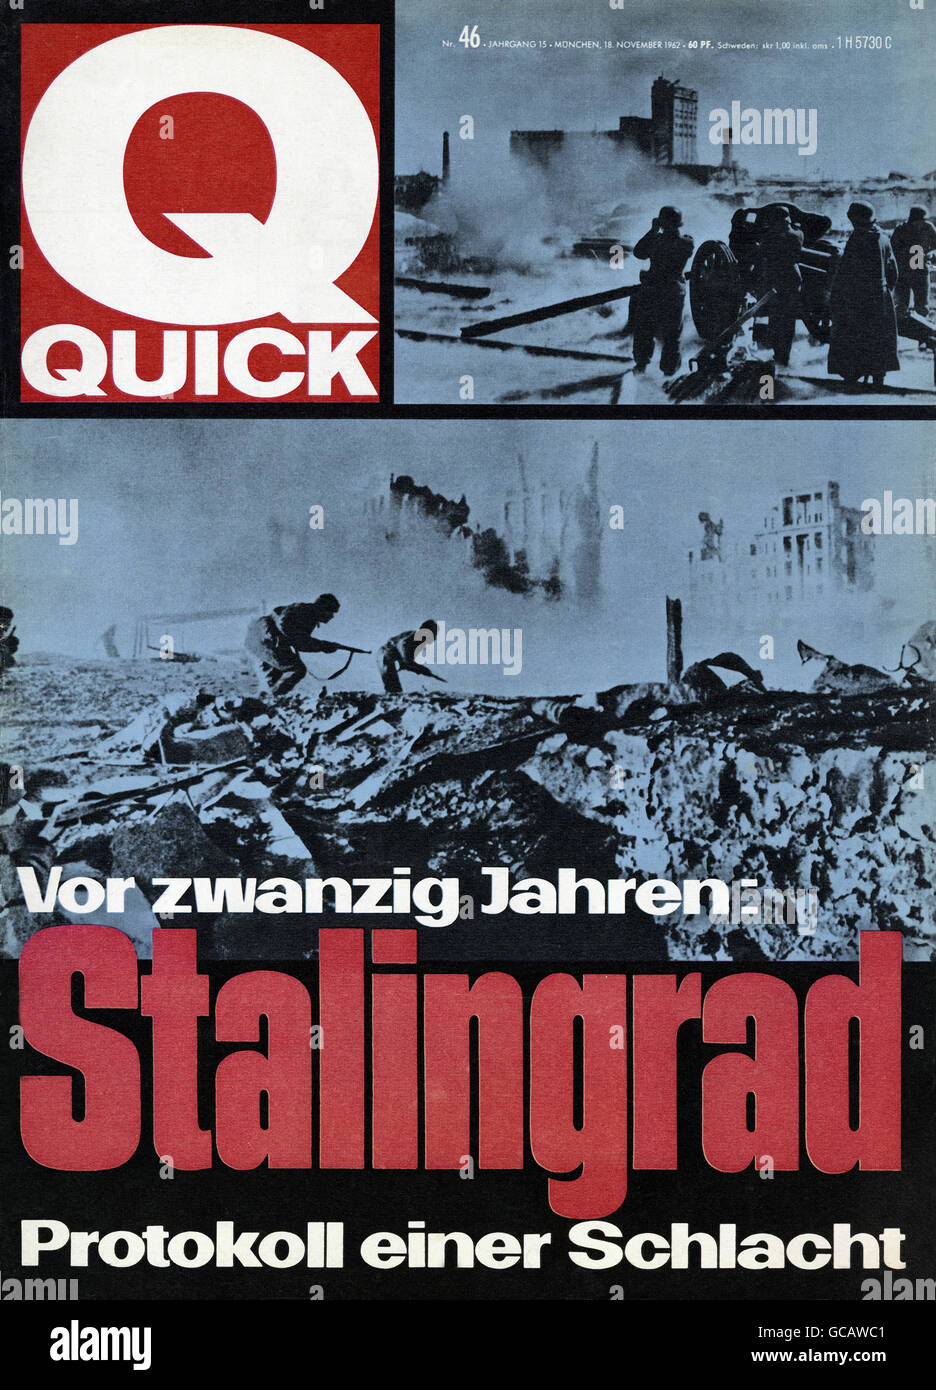 magazines, 'Quick', magazine 46, title: 'Vor zwanzig Jahren - Stalingrad' (20 years ago - Stalingrad), Munich, Germany, 18.11.1962, Additional-Rights-Clearences-Not Available Stock Photo